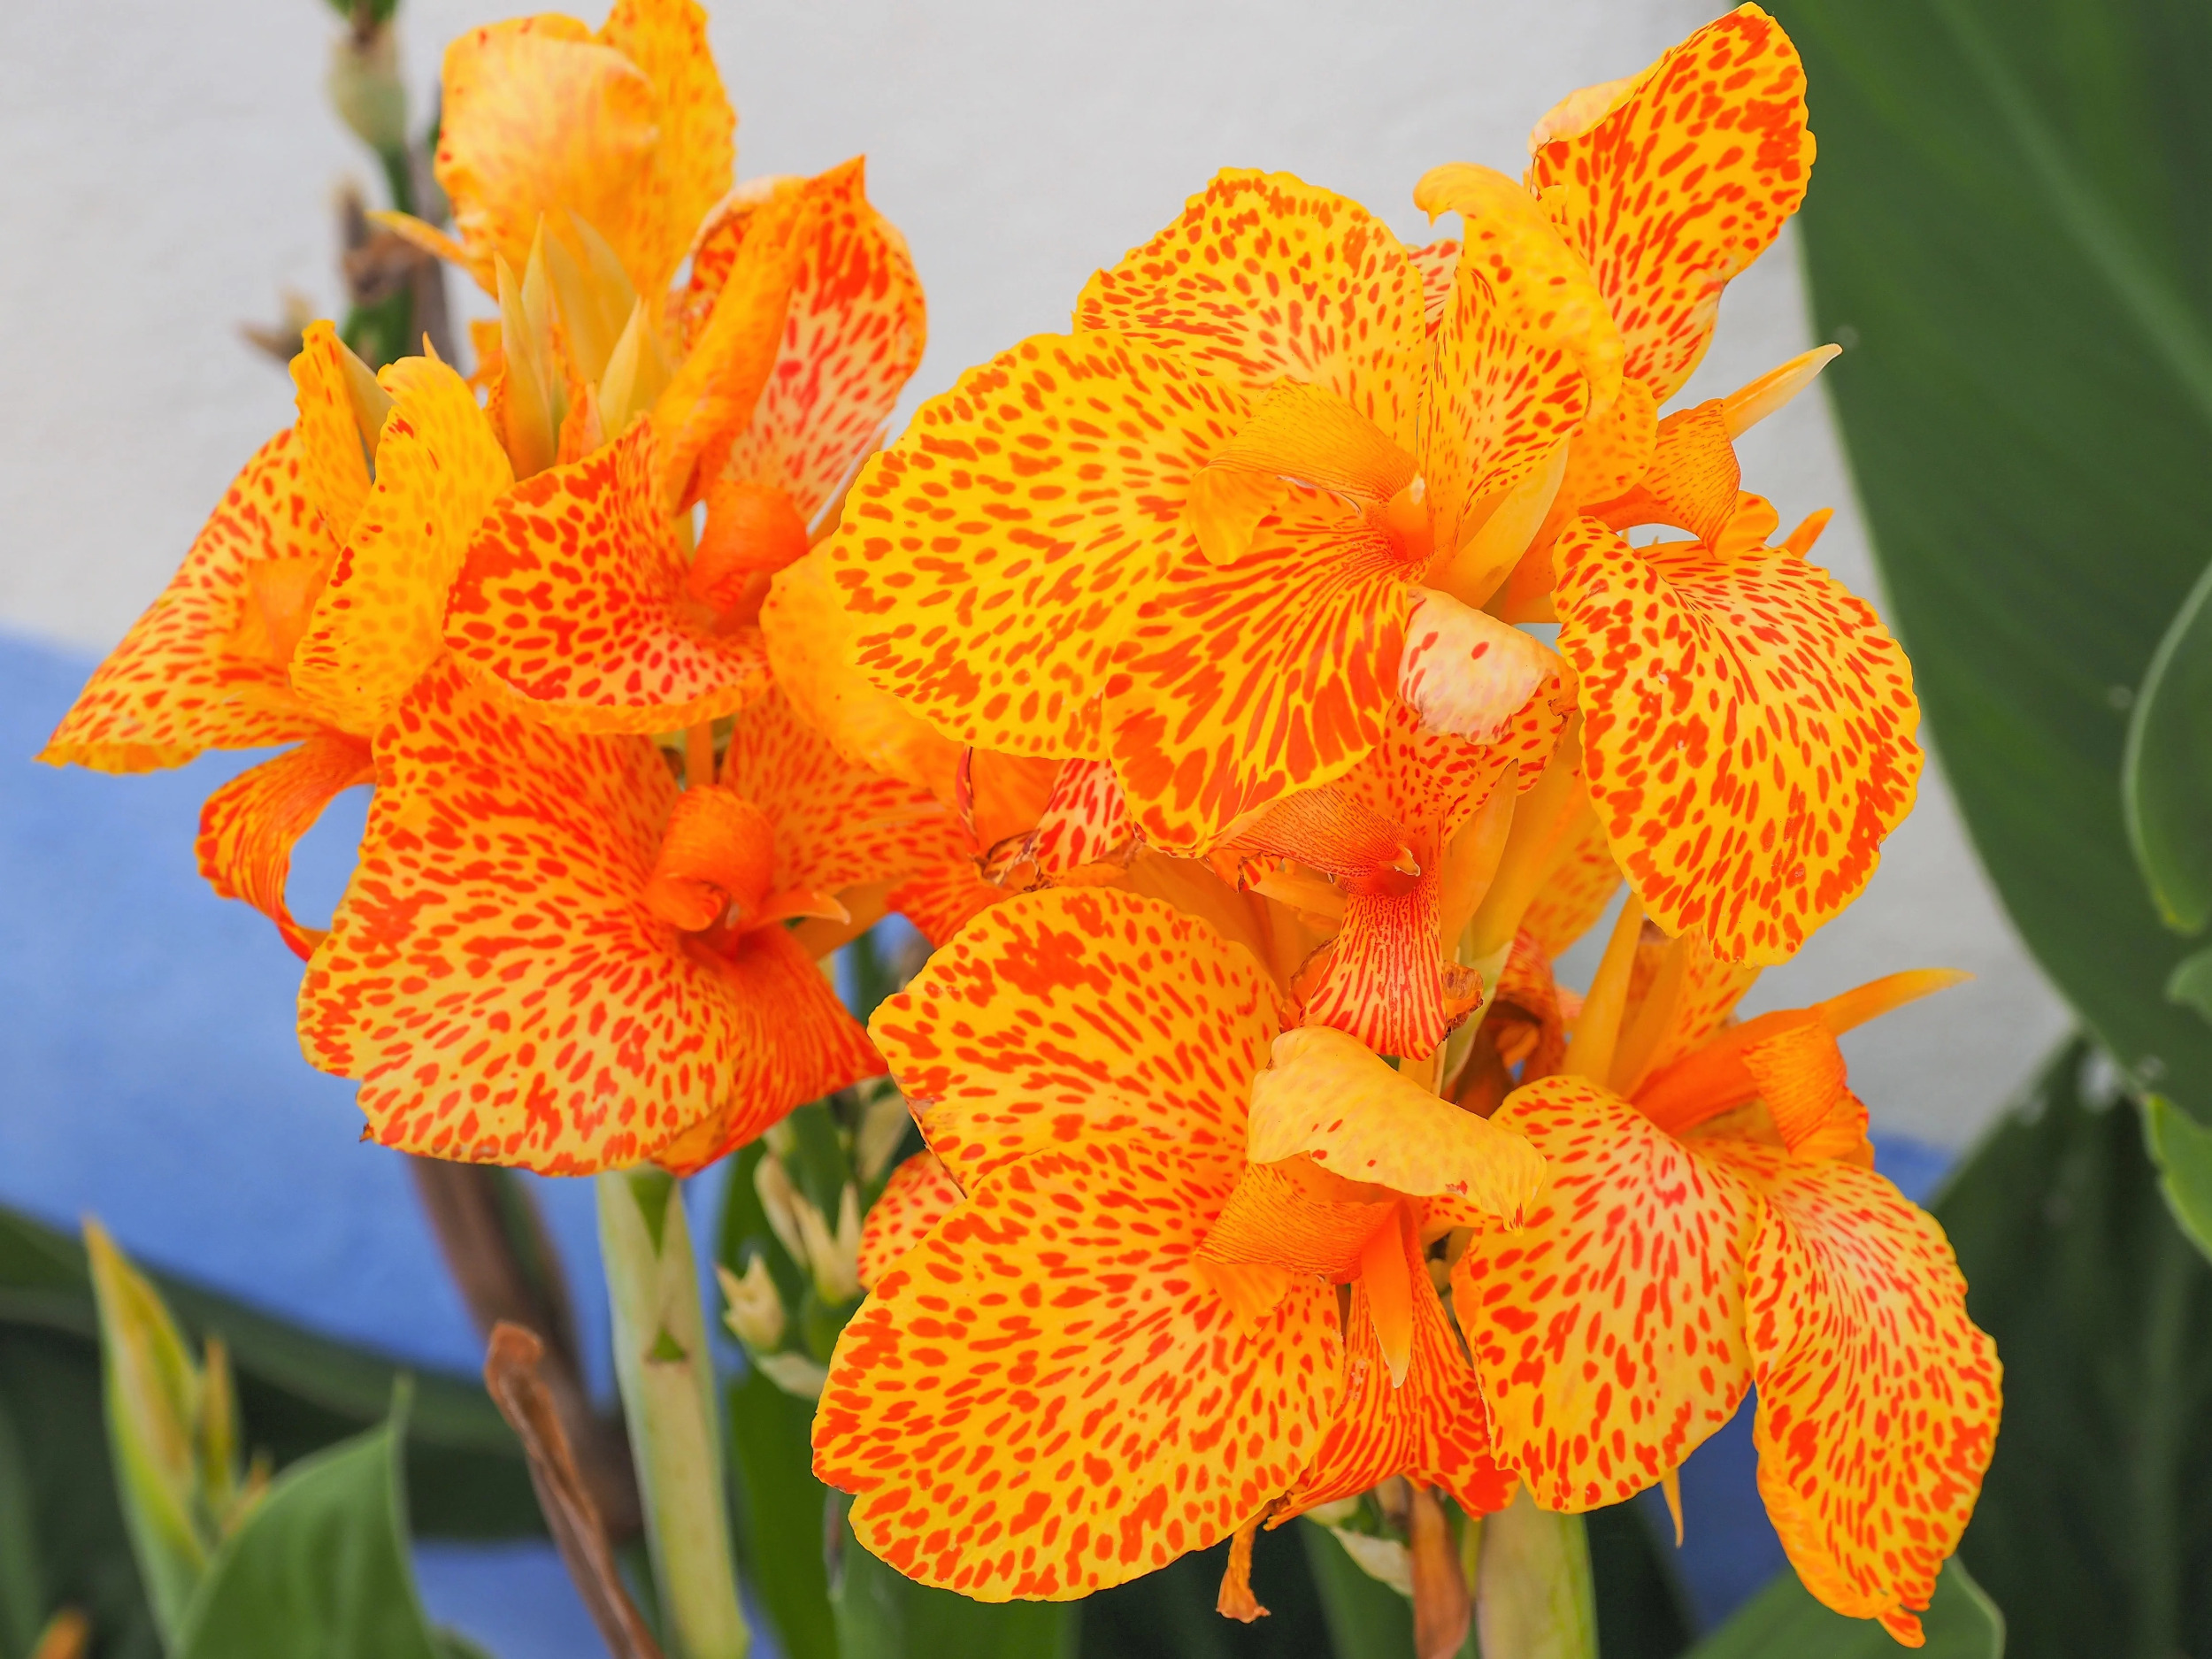 5 YELLOW CANNA LILY Indian Shot Canna Indica Flower Seeds - image 1 of 10